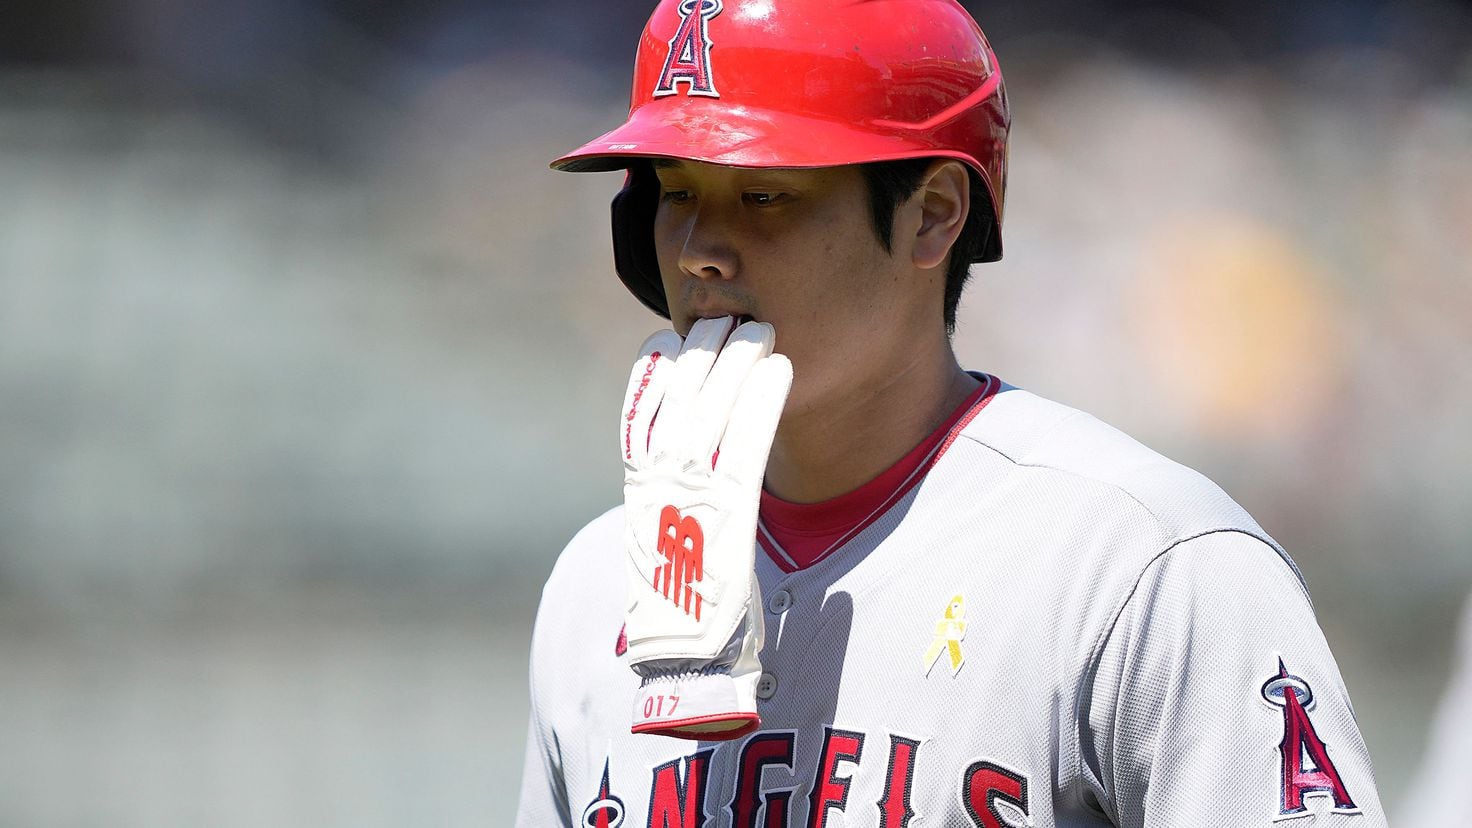 Los Angeles Angels: Should Shohei Ohtani be shut down in September?